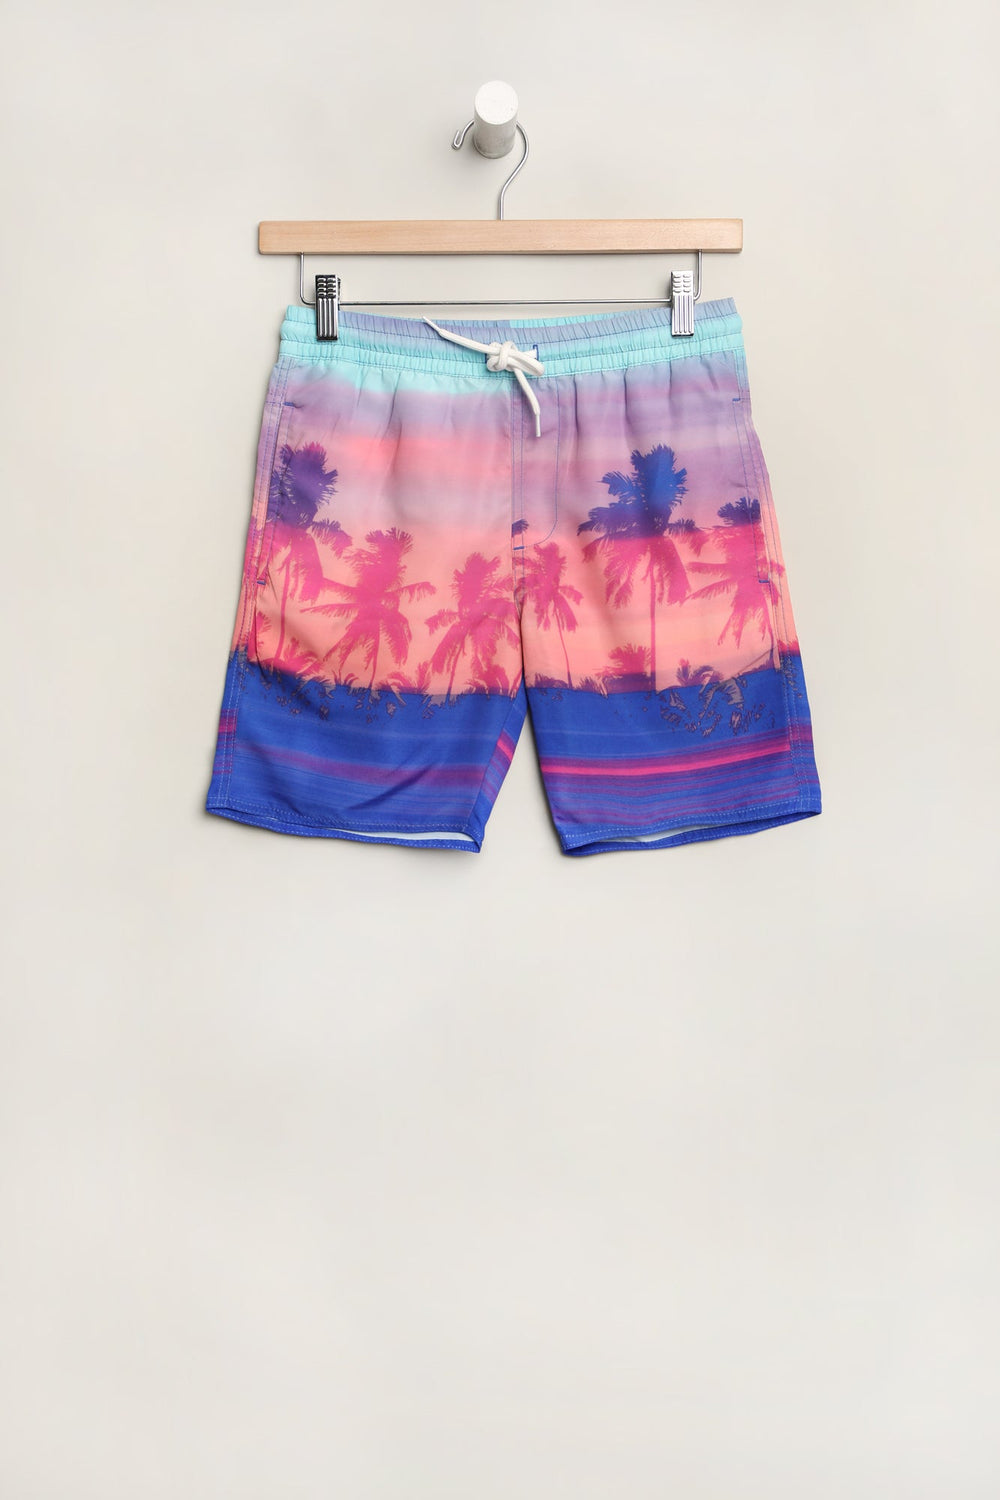 West49 Youth Sunset Print Beach Shorts West49 Youth Sunset Print Beach Shorts